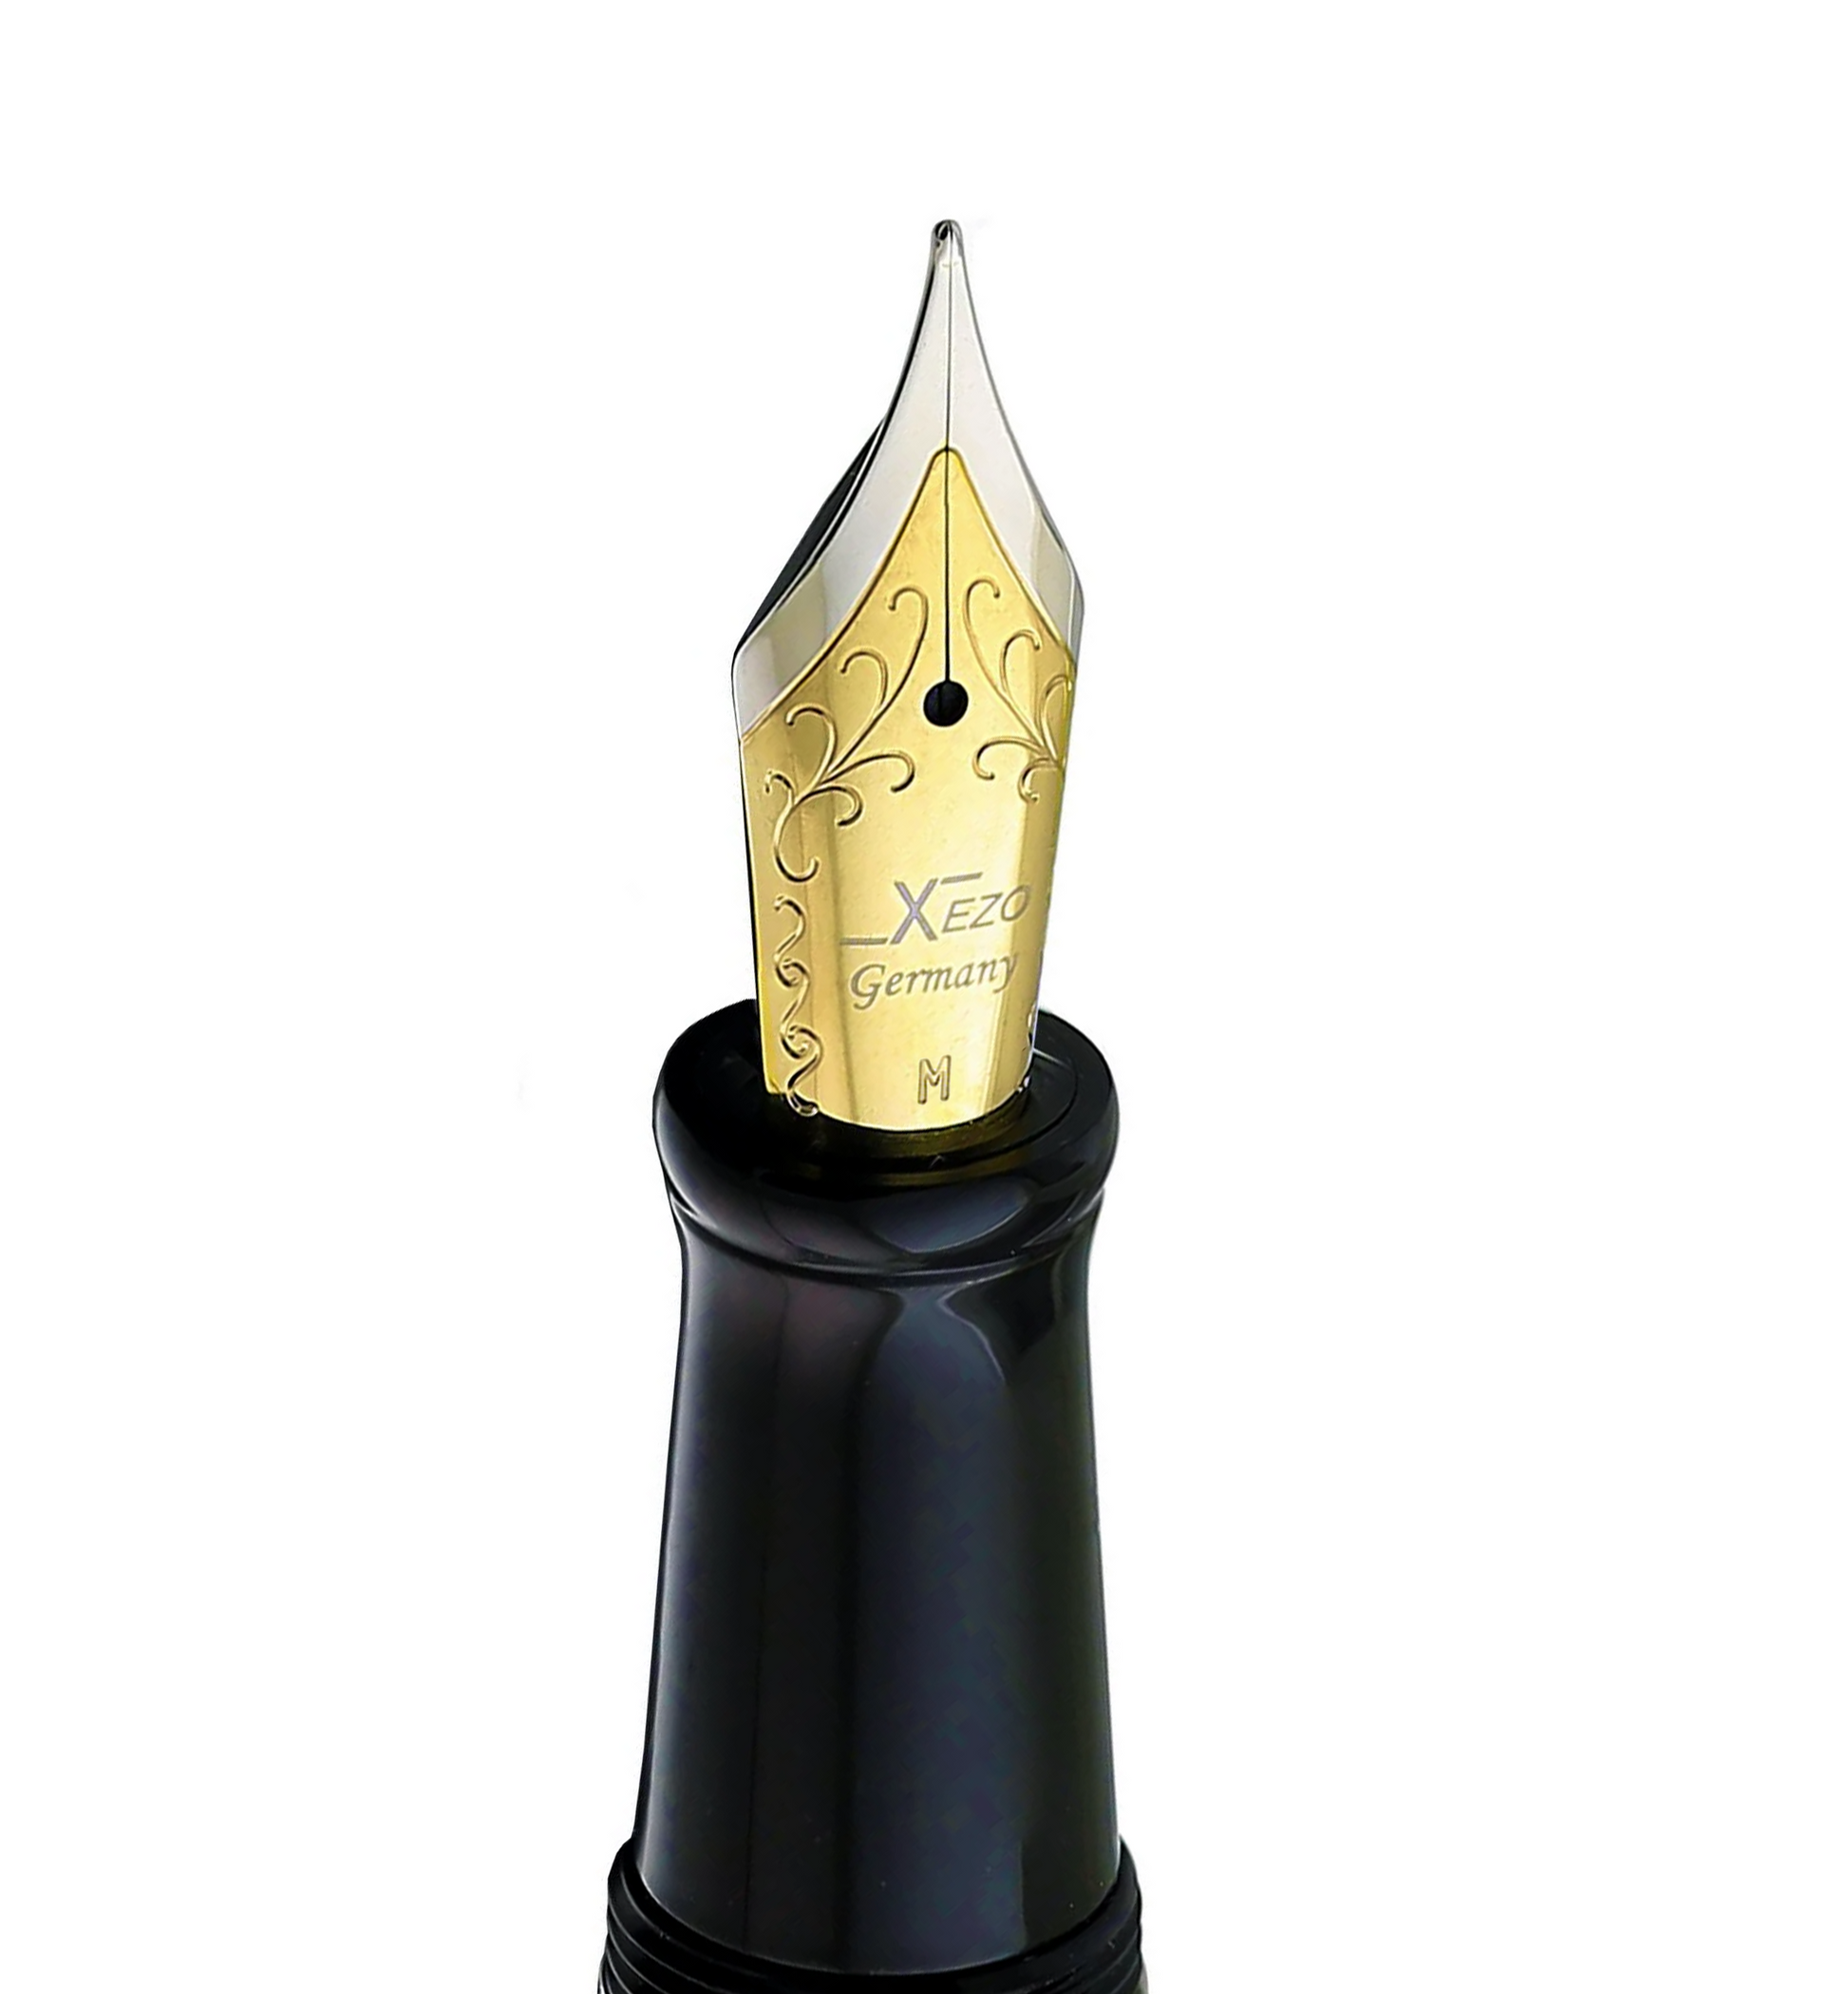 Xezo - Angled view of the front of the Maestro LeGrand Medium Nib with gold-plated body, stainless steel tines, and black grip section. Compatible with Maestro LeGrand fountain pens. The body of the nib has motif patterns.